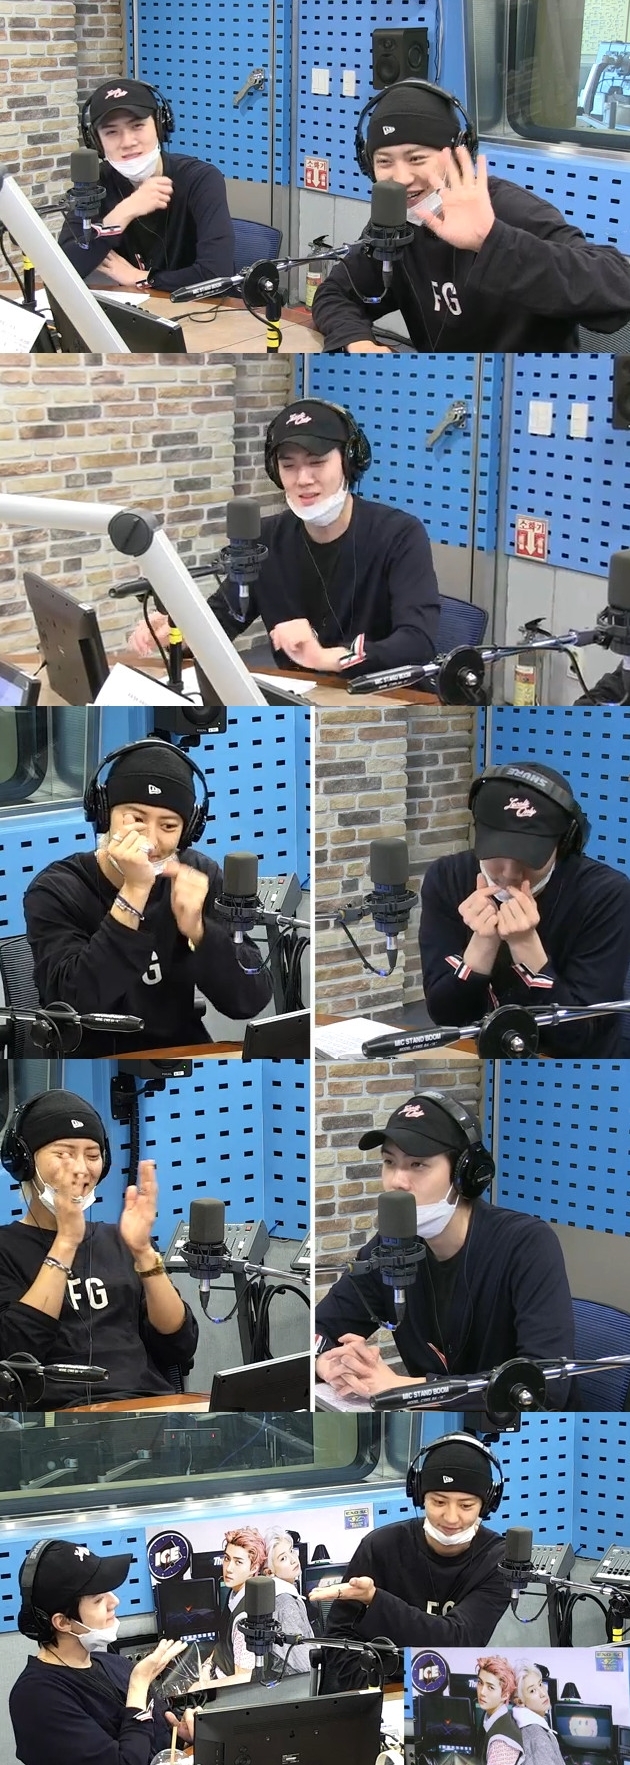 EXO Sehun & Chanyeol appeared as a guest on SBS Power FM Hwa-Jeong Chois Power Time broadcast on the afternoon of the 14th.When Hwa-Jeong Choi said, I like skin too much, Sehun said, I just do nothing.When I appeared in 2017, it was about 65kg, but now it is 70kg. Chanyeol said, Sehun goes to dermatology hard. On the new song A billion view, Sehun said, Gaeko type produced it, but it was the idea of ​​Gaeko type. I want to see you until A billion view.Its a retro-based disco hip-hop song, and the lyrics are easy, Chanyeol said.It is a good song to listen to at a time when video platforms are active these days. Asked what the video you see a lot of recently, Chanyeol said, There is a channel I subscribe to. There is a short 10 minutes of scientific content.There are so many interesting things. There are aliens, physics, and science. I did not study when I was in school, so it was fun now. But I should not look at food before bed.Sehun then said: Every time its different, at night, Im rich in sensitivity and I see something touching: Im looking for something calm and sad.Chanyeol said: Sehun hits the iron wall well, obviously I know he sees Tok, but he doesnt answer well and he doesnt answer well; hes getting well these days.I think Im selfish, I contacted you when I needed it, I used to not get it when I was bothered, Sehun said, adding that Chanyeol but I keep in touch.I drink just as I do, not a lot of times, I like to drink, Sehun added, when he said, Is it when I drink?When asked, What do you pretend to look at reason? Sehun said, I pretend to be normal. It seems to be a little closer to my brothers.If I like reason, pretend to be interested, actively approach and speak, Chanyeol said.Chanyeol said, Sehun was a complete baby when Idol Producer.And three years later, I followed him, and then he rebelled against me during the scorching period, and I was playing a bad joke and I grabbed my leg, and Sehun hit me.So I was shocked and stunned. From that time on, I started to be afraid of Sehun Two people, 12 years old: Chanyeol, recalled: I first came in the company and saw Sehun, and I thought it was SM too good-looking, too.Sehun said at the time, I was not good at the first impression among Idol Producer because I was nervous when I was dealing with the musical instruments, and Chanyeol said, I do not like it and I did not know it at that time.I was very confused because the big agency and the world I knew were so different. I thought, I am Chanyeol, but I was really sad when I first entered.There were many people who were good at it, he said.The youngest Sehun said, Im the youngest in EXO, and Im still the youngest. Im used to being cute when I debut at a young age.Now I hear you, brother. I dont hate it, I feel Im old. Chanyeol then said, I feel the same.My younger siblings are coming to greet me in the waiting room of the music show, but I just feel like I am a bandmate. Sehun stars with his pet dog, Bibby, in his solo song On Me, who said, I was actually worried about it, and I thought I should get the best of my condition.And I was more worried about the delays, but I said, Wait, and in five minutes, I got okay. So Bibby went home.I stayed and filmed more, he said.Chanyeol, who has collaborated with several artists, including featuring in Lee Sun-hees new song, said: I love working on music and I like to leave something behind.So I try to break up time even in the middle of my busy life. And I talk a lot while I do.So does teacher Lee Sun-hee, and I like to get to know the musicians, so I become more obsessed. I am passionate. Chanyeol said, I want to leave the moment when I want to see it again as much as A billion view.I think Im thrilled from head to toe then. If I ask you to pick, Ill pick Showcase. Its the first time.But I dont want to see it as much as A billion view. I dont have enough time and I dont have enough time. I want to leave the time when I get the target. Sehun said, I go in from the end of July when I came out as a good-looking person who shoots well in the movie Pirates 2.The bow is heavy, and I am training now, but it is harder than I thought. I am still working hard.On the other hand, Sehun & Chanyeol announced the new song A billion view on the 13th and started its activities.